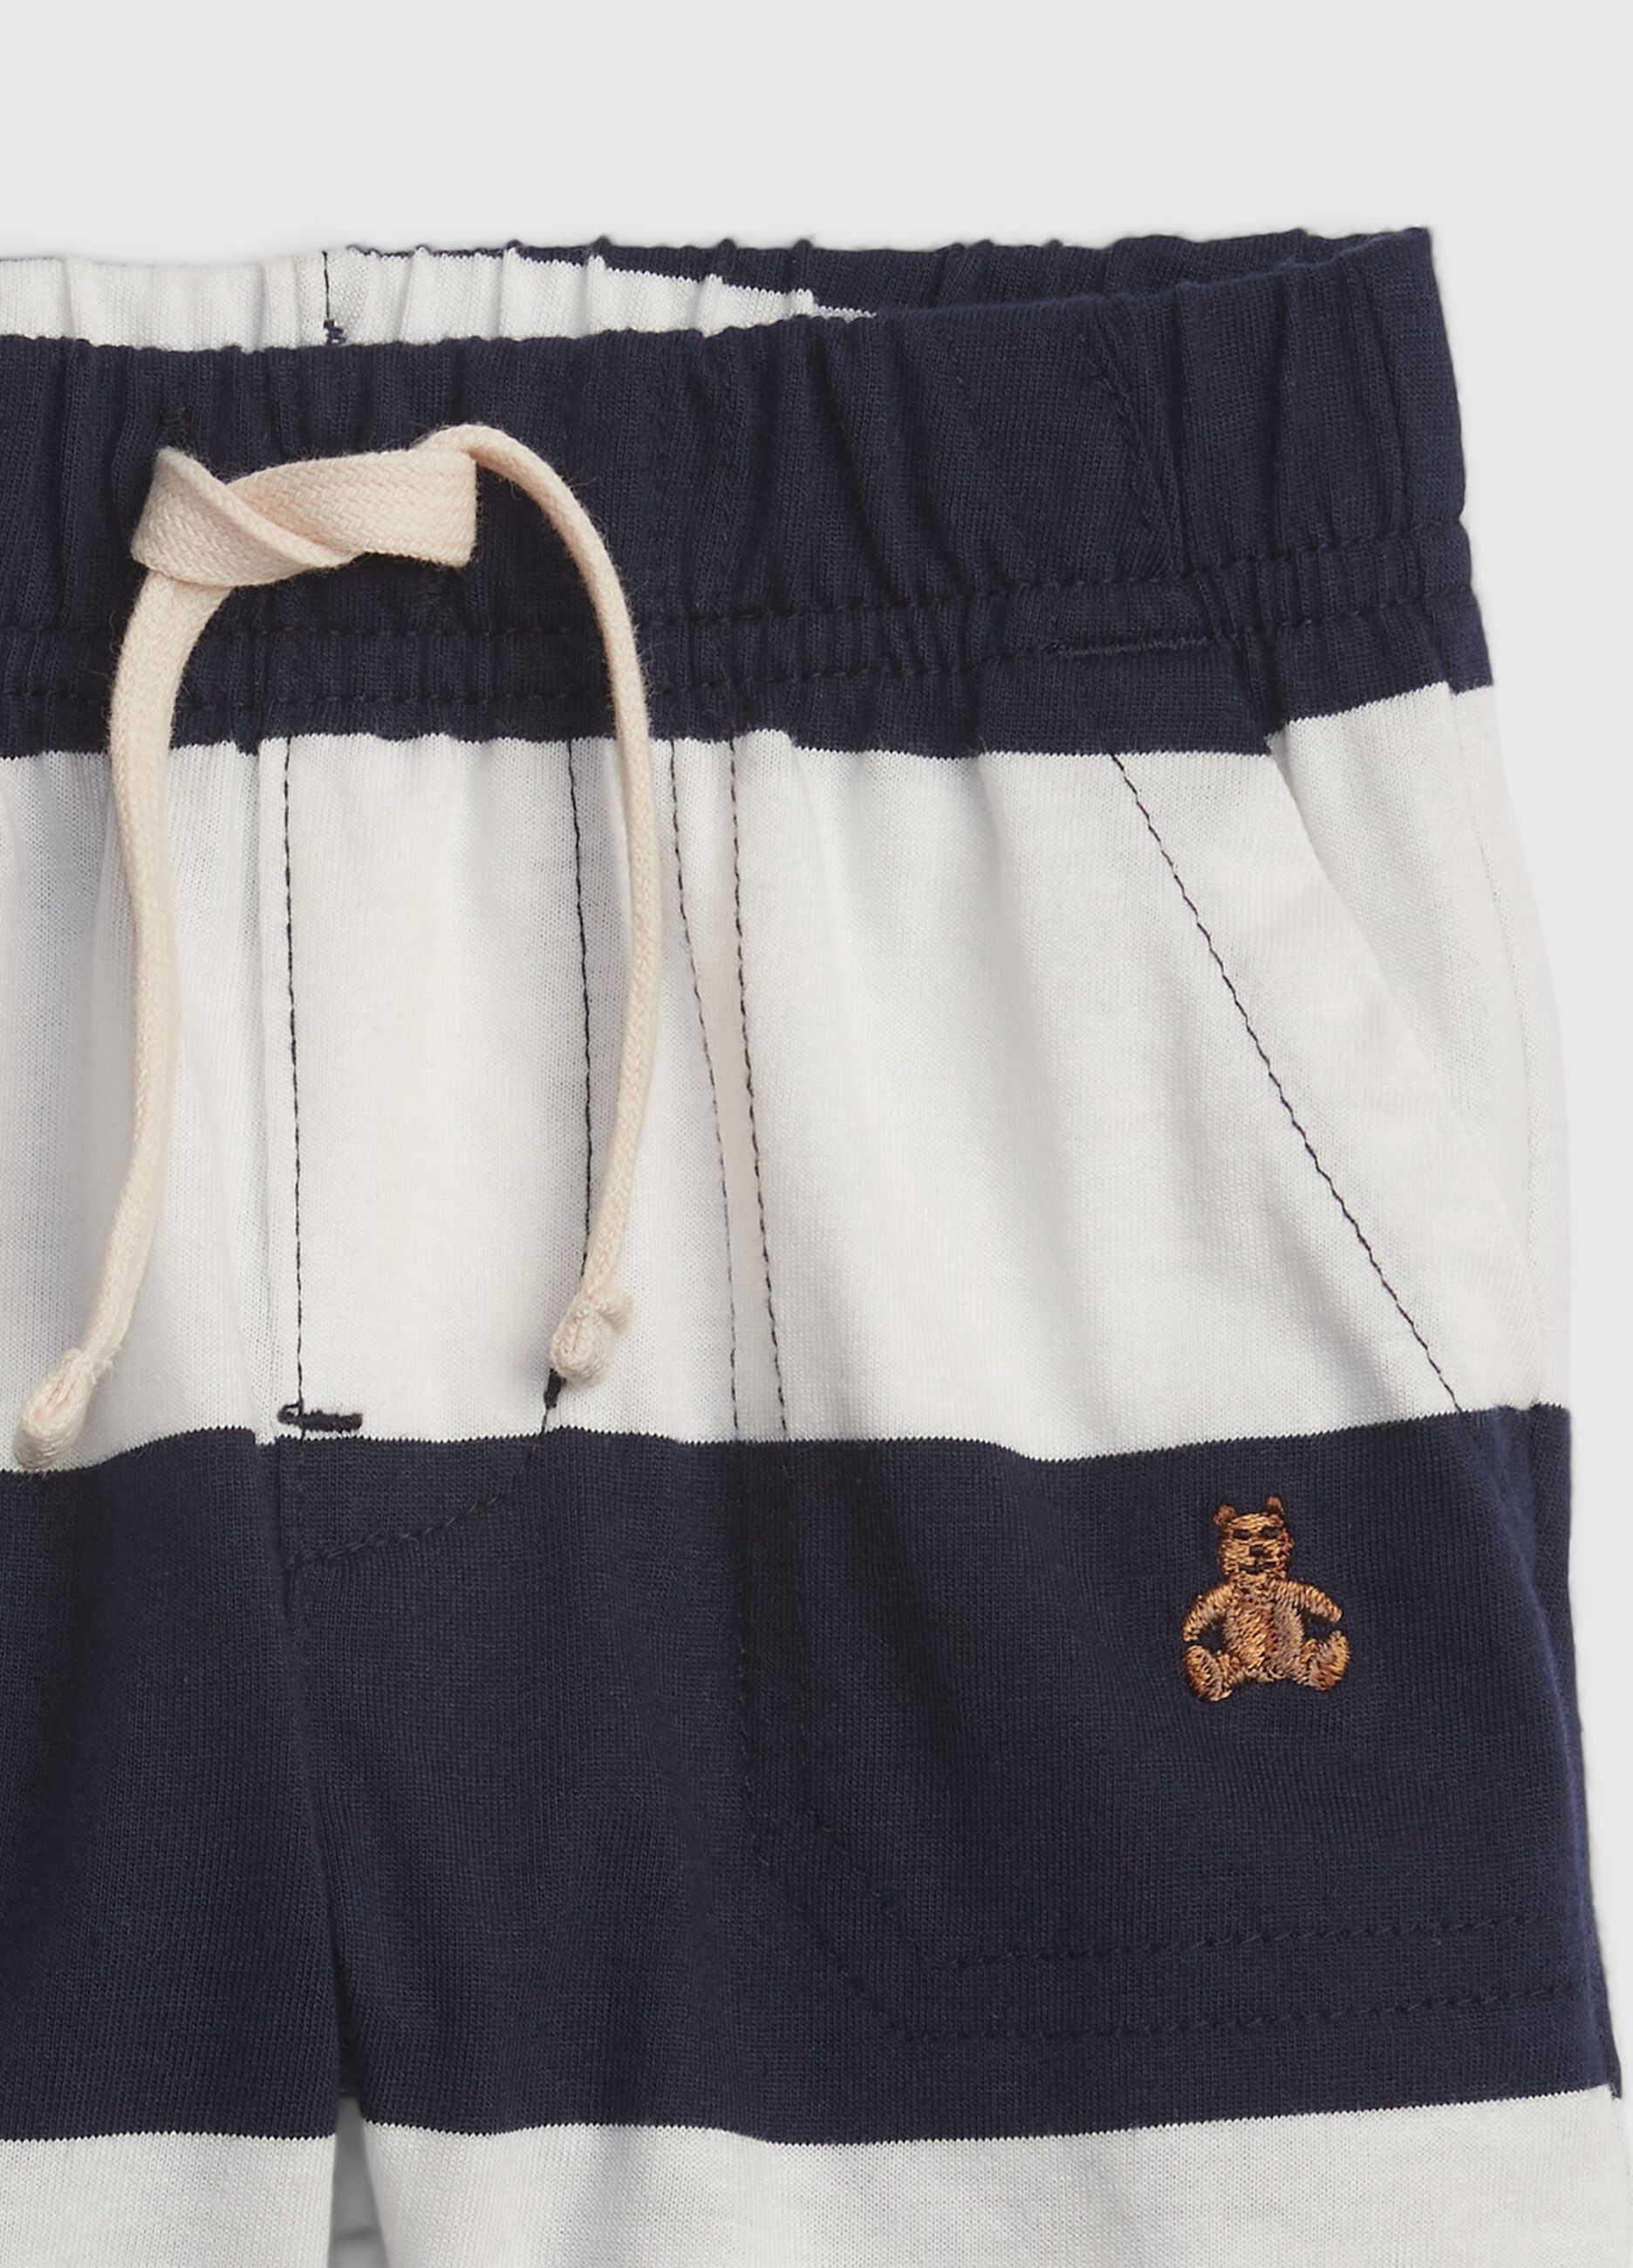 Striped shorts with teddy bear embroidery